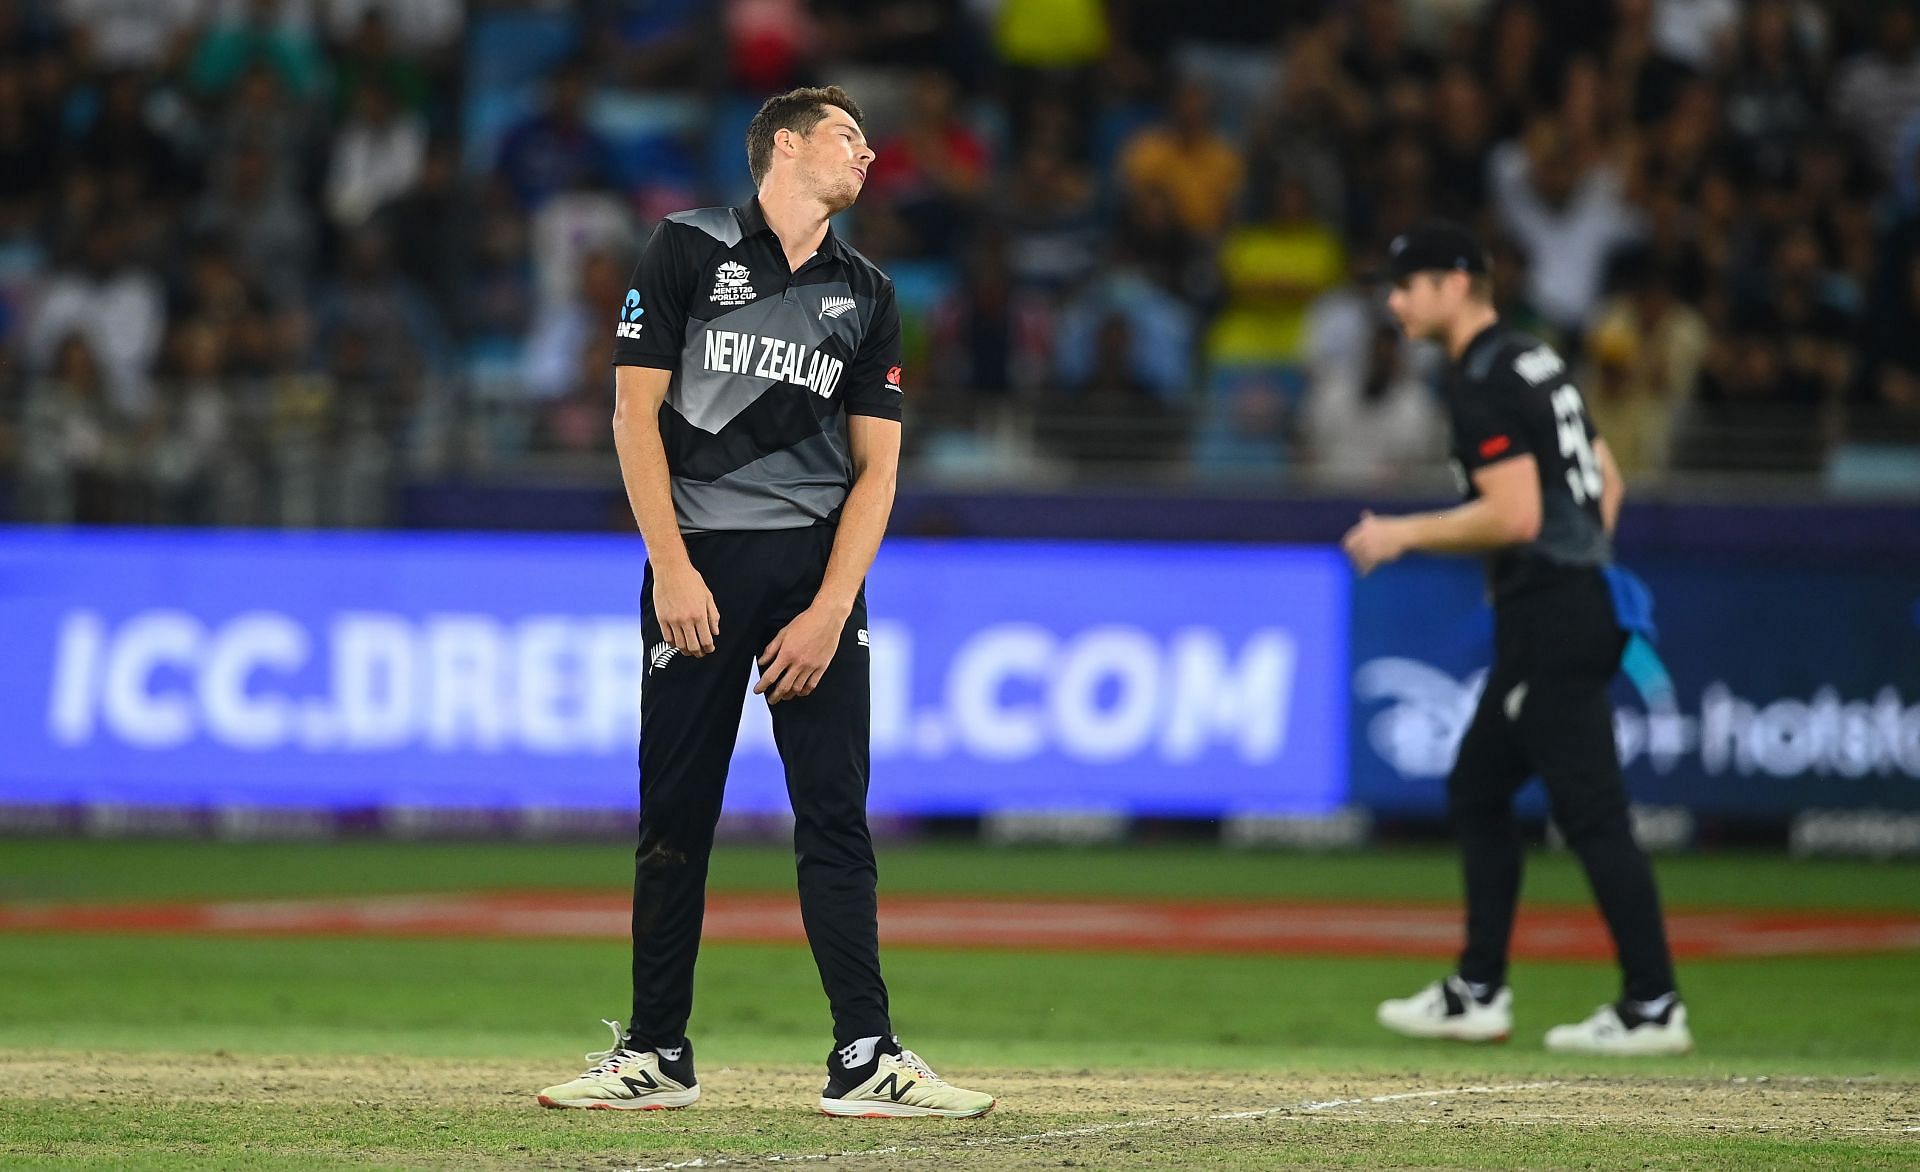 Mitchell Santner led New Zealand in the third T20I against India in Kolkata